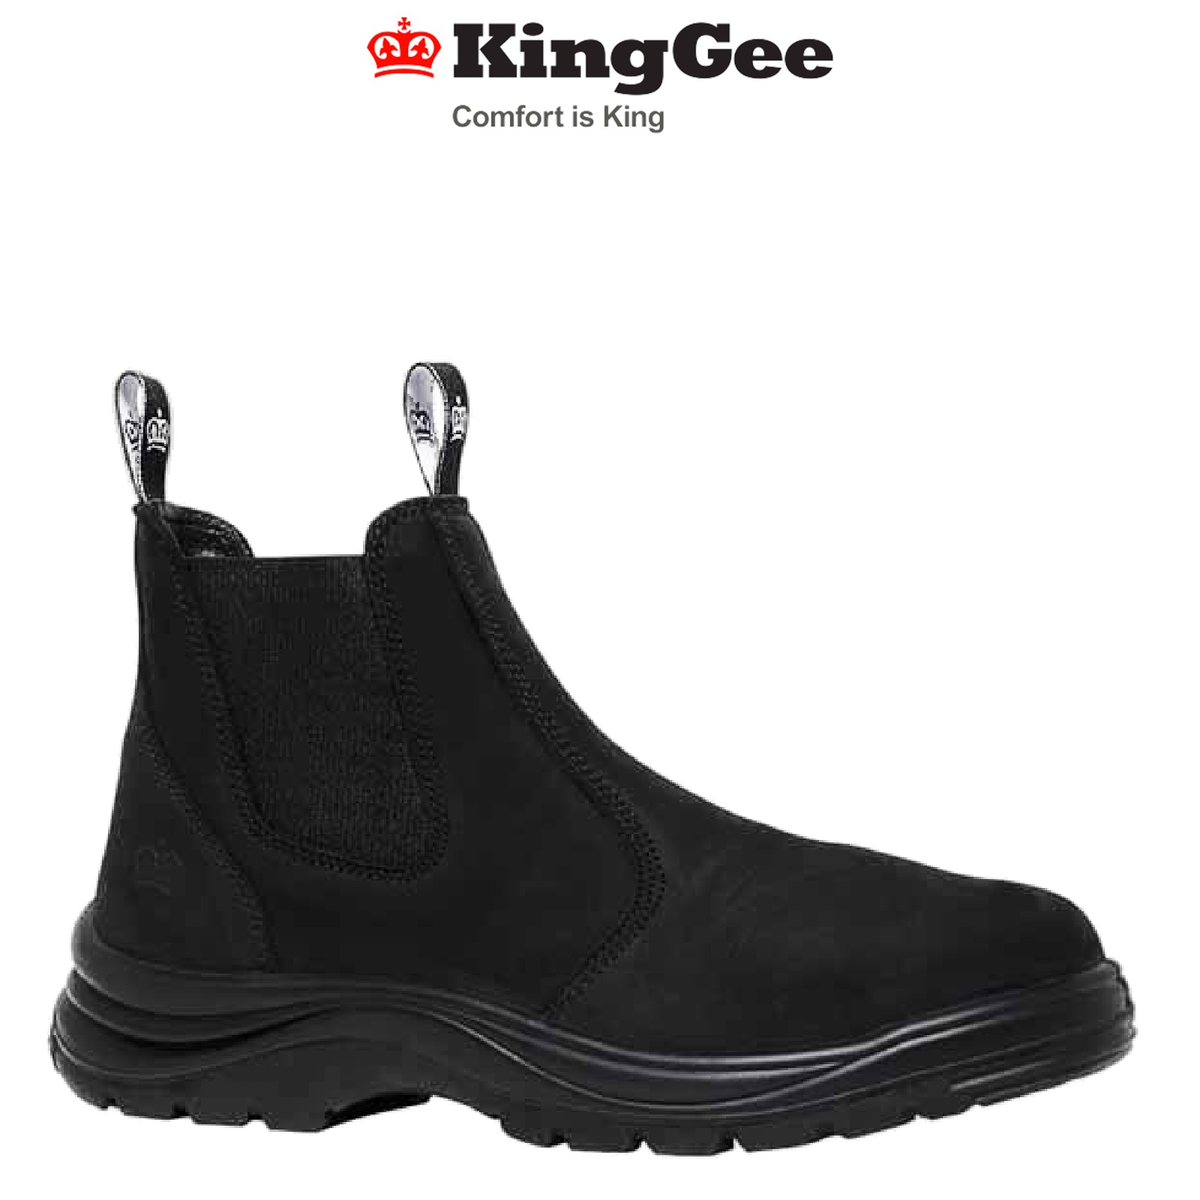 KingGee Mens Station NS Water Resistant Work Boots Leather Memory Foam K22600